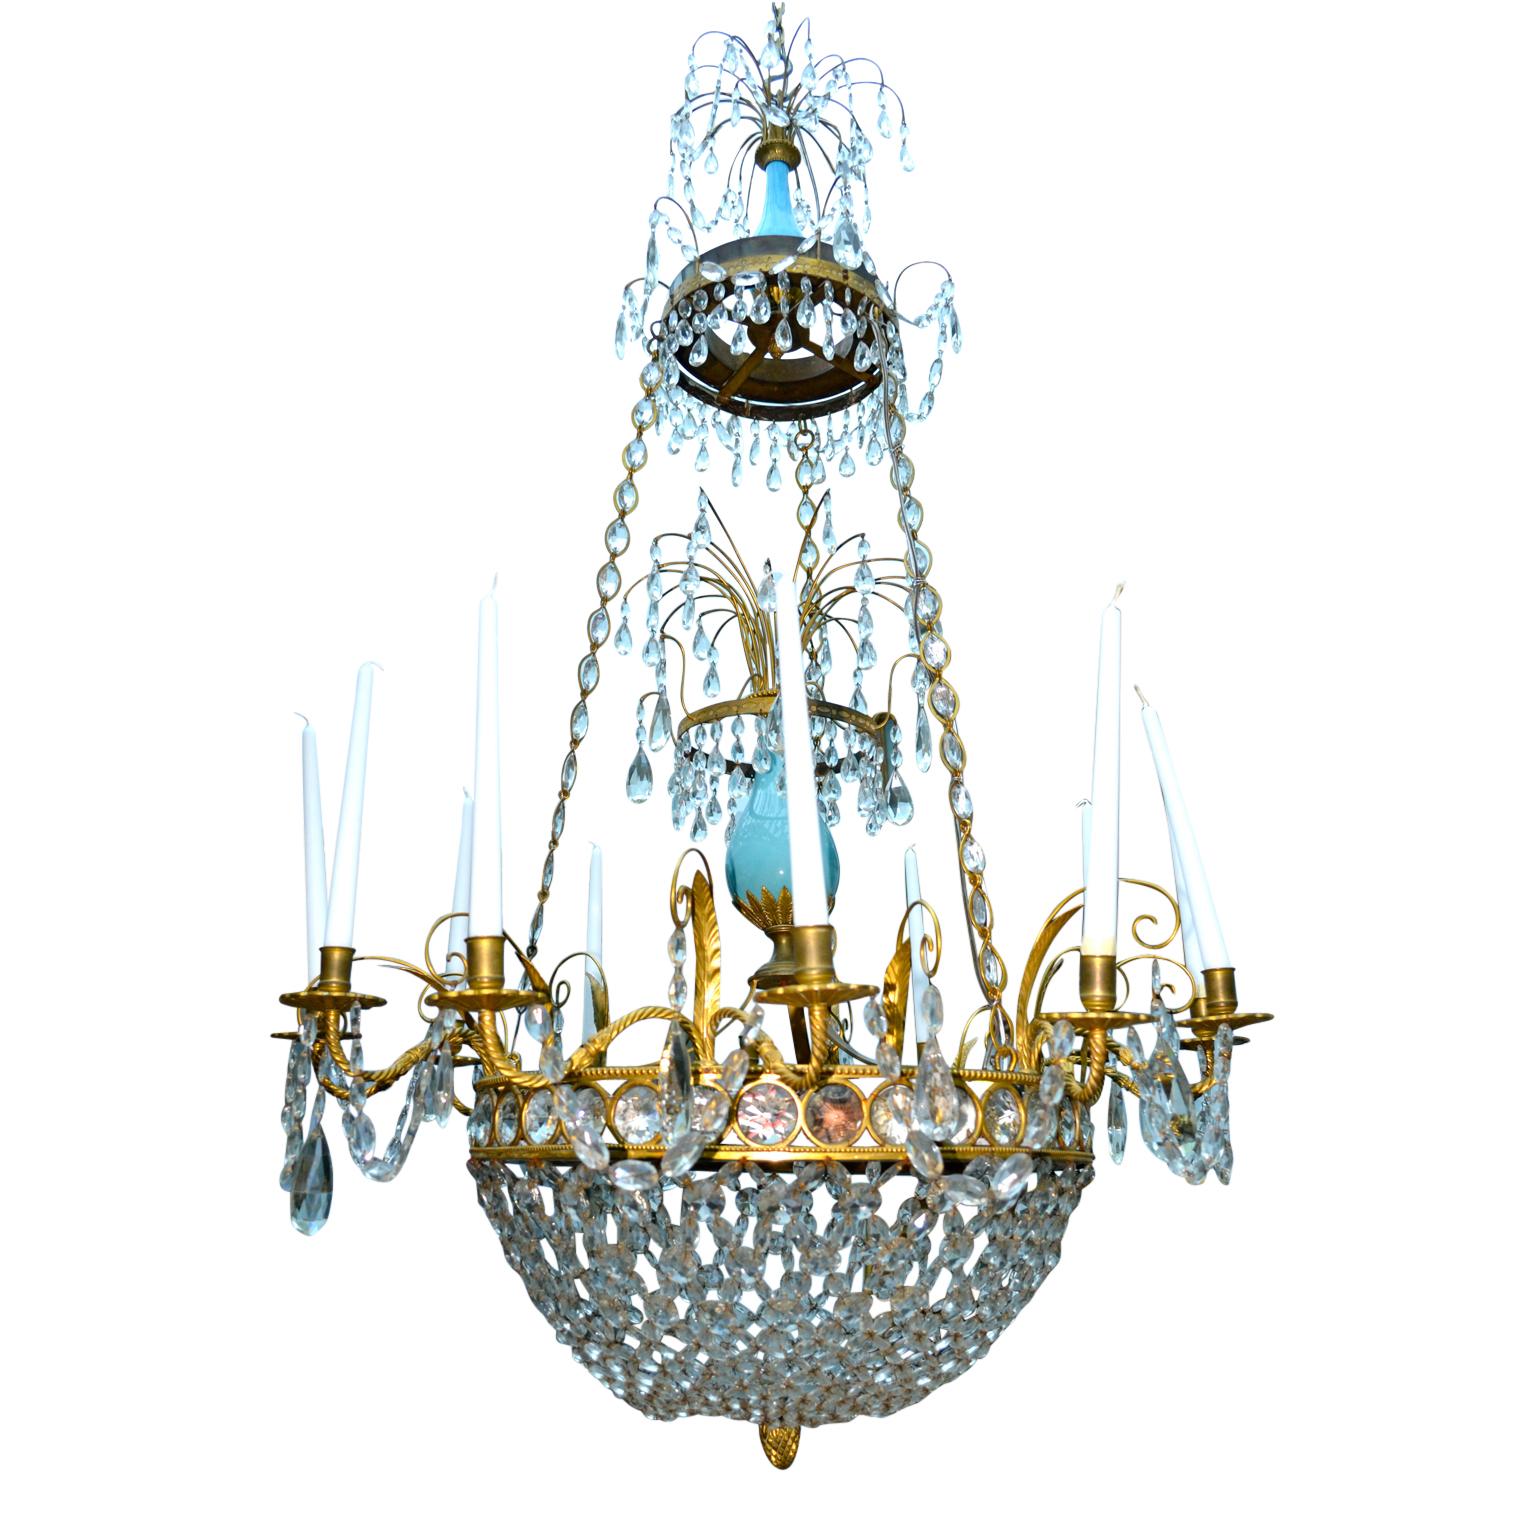 A rare late 18th century Russian or possible Prussian neo-classical chandelier, having twelve arms around a central gilded bronze corona pierced with round cut crystals; the corona suspended from three gilded chains pierced with crystals; the lower